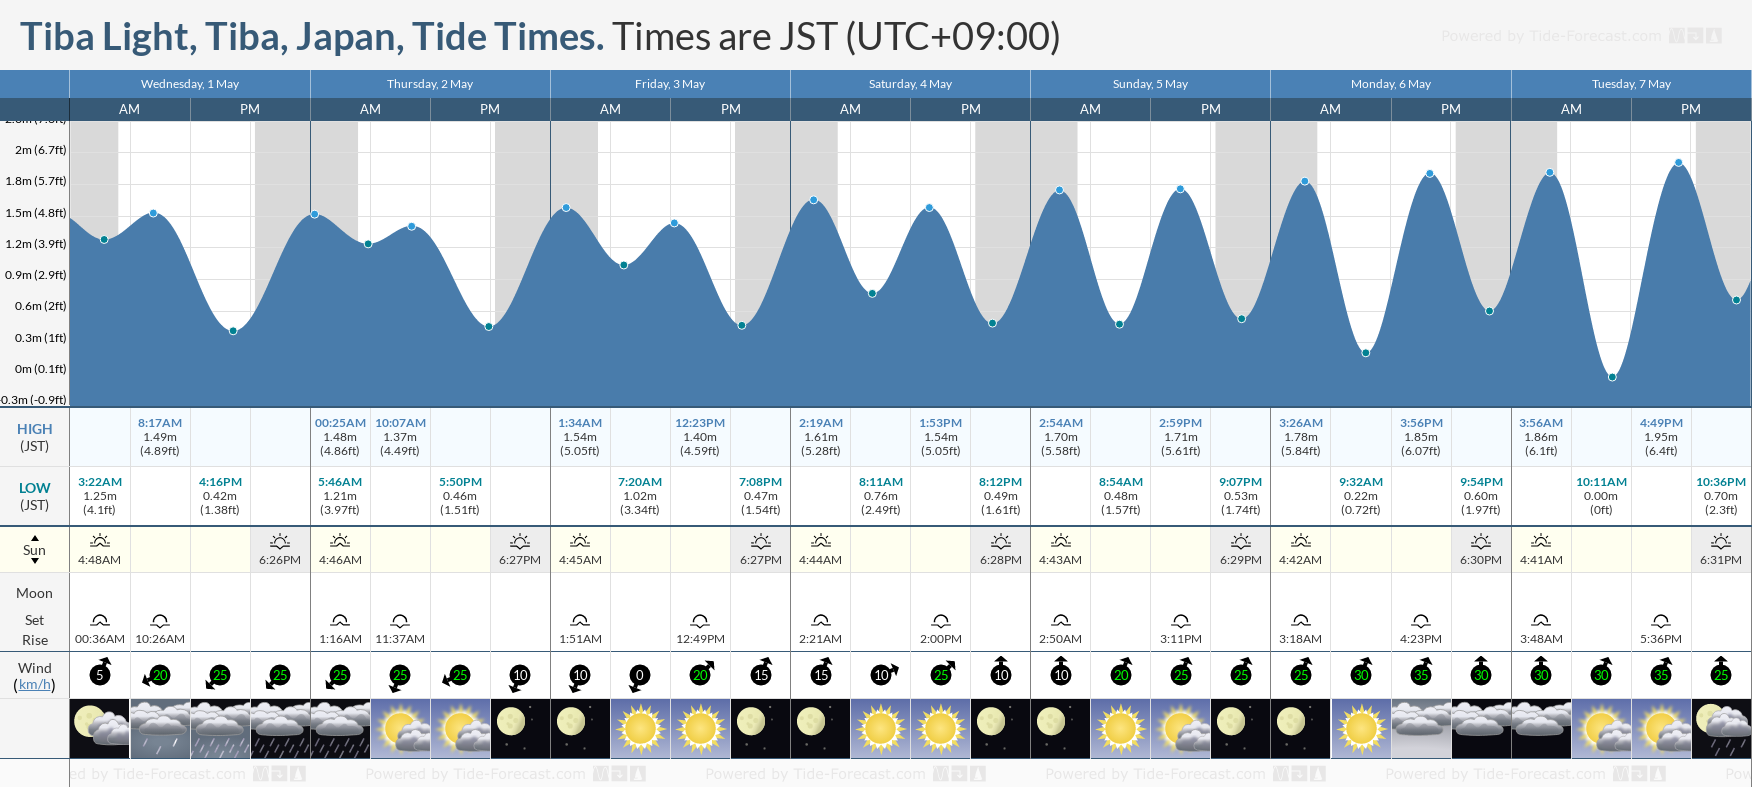 Tiba Light, Tiba, Japan Tide Chart including high and low tide tide times for the next 7 days